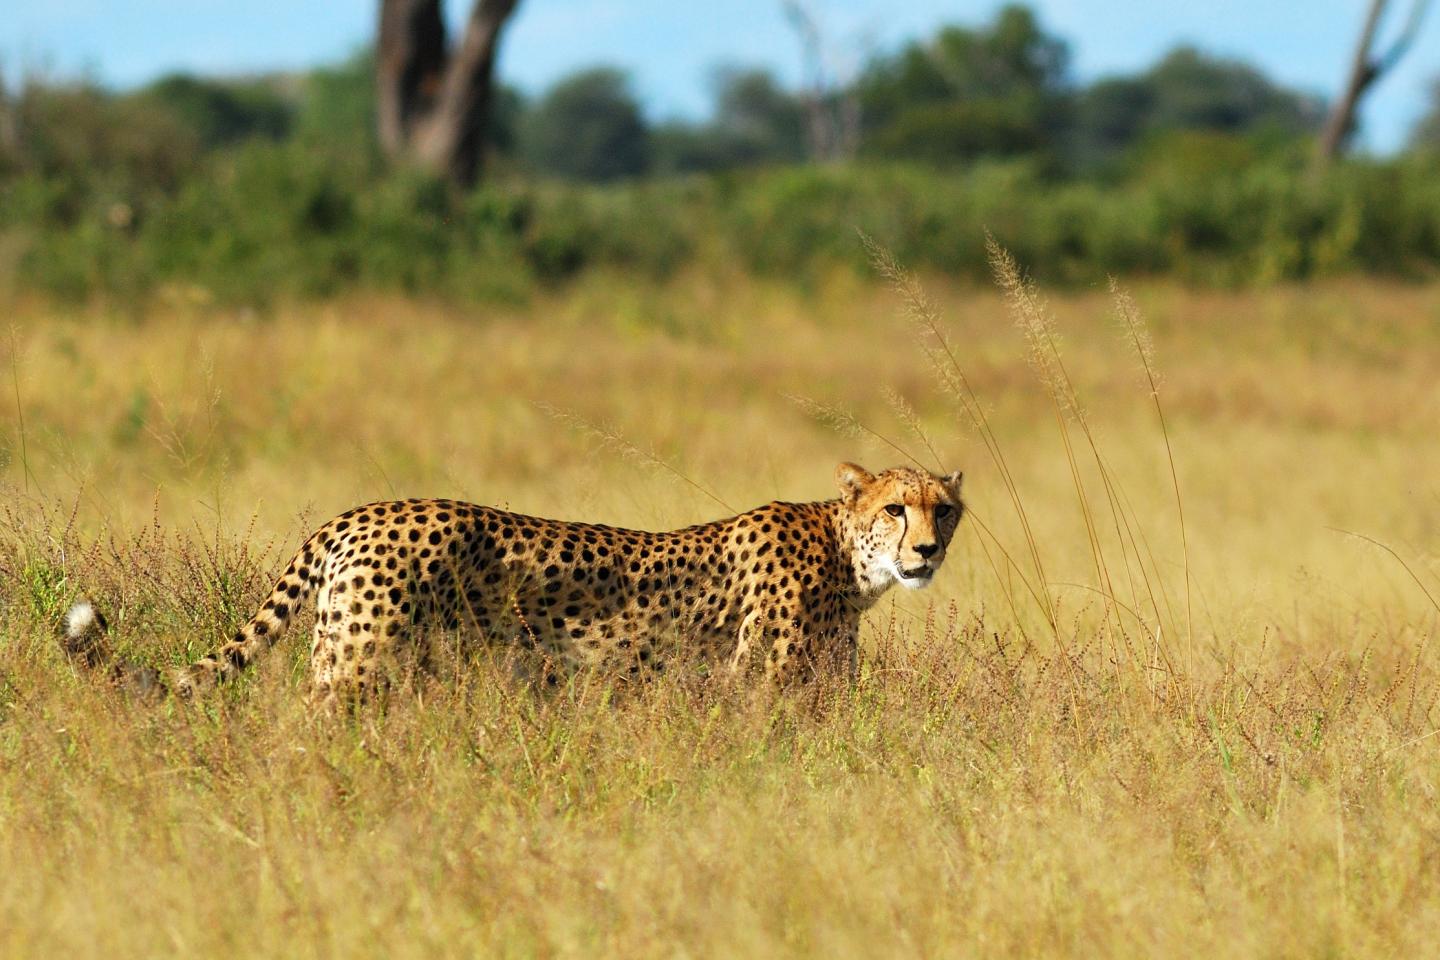 Southern Africa's Cheetah Population Much Smaller Than Believed